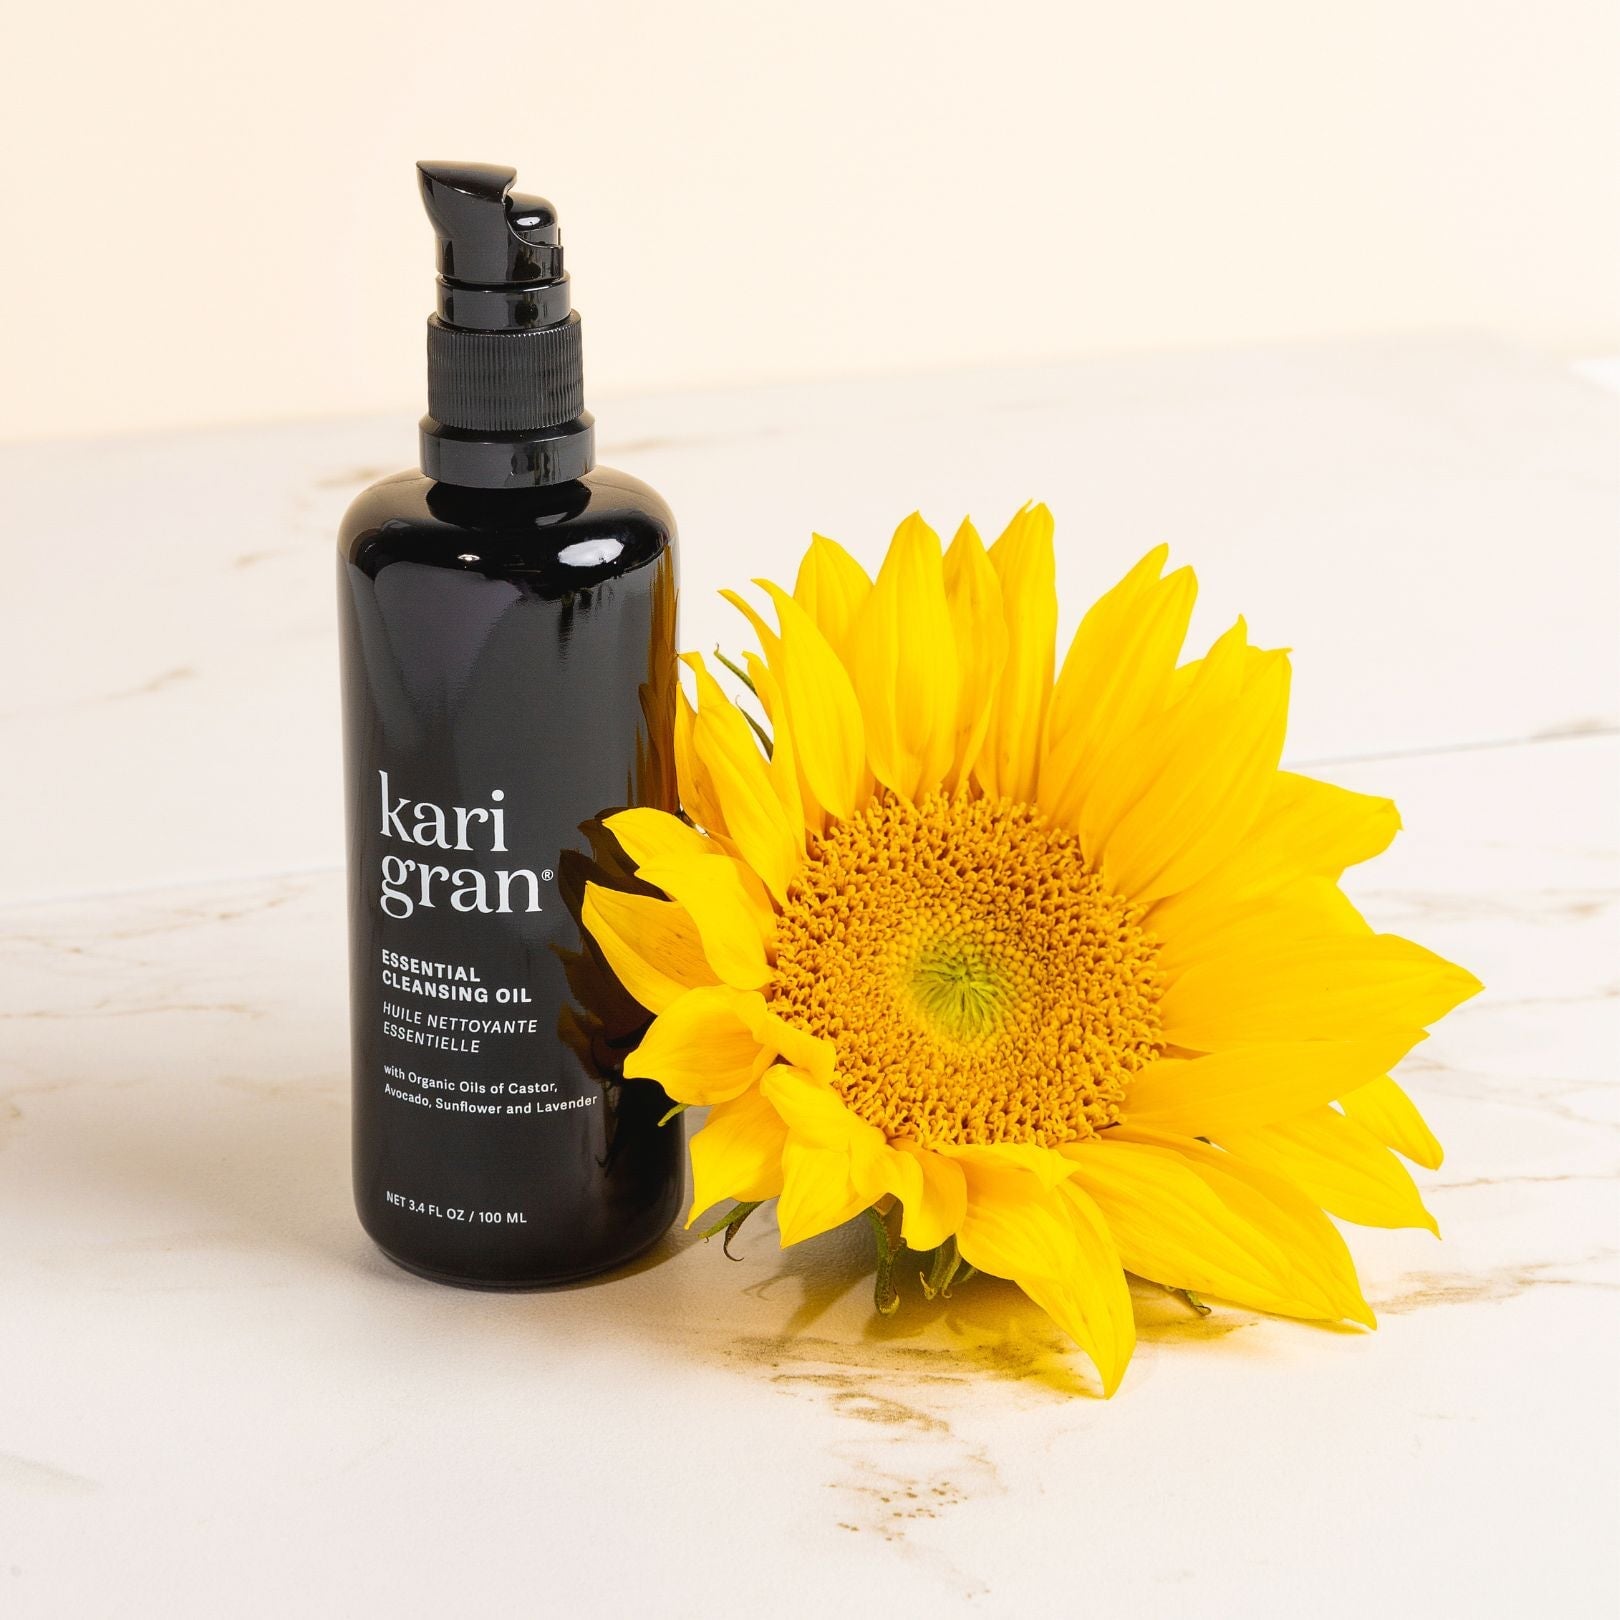 kg cleansing oil next to a sunflower on table